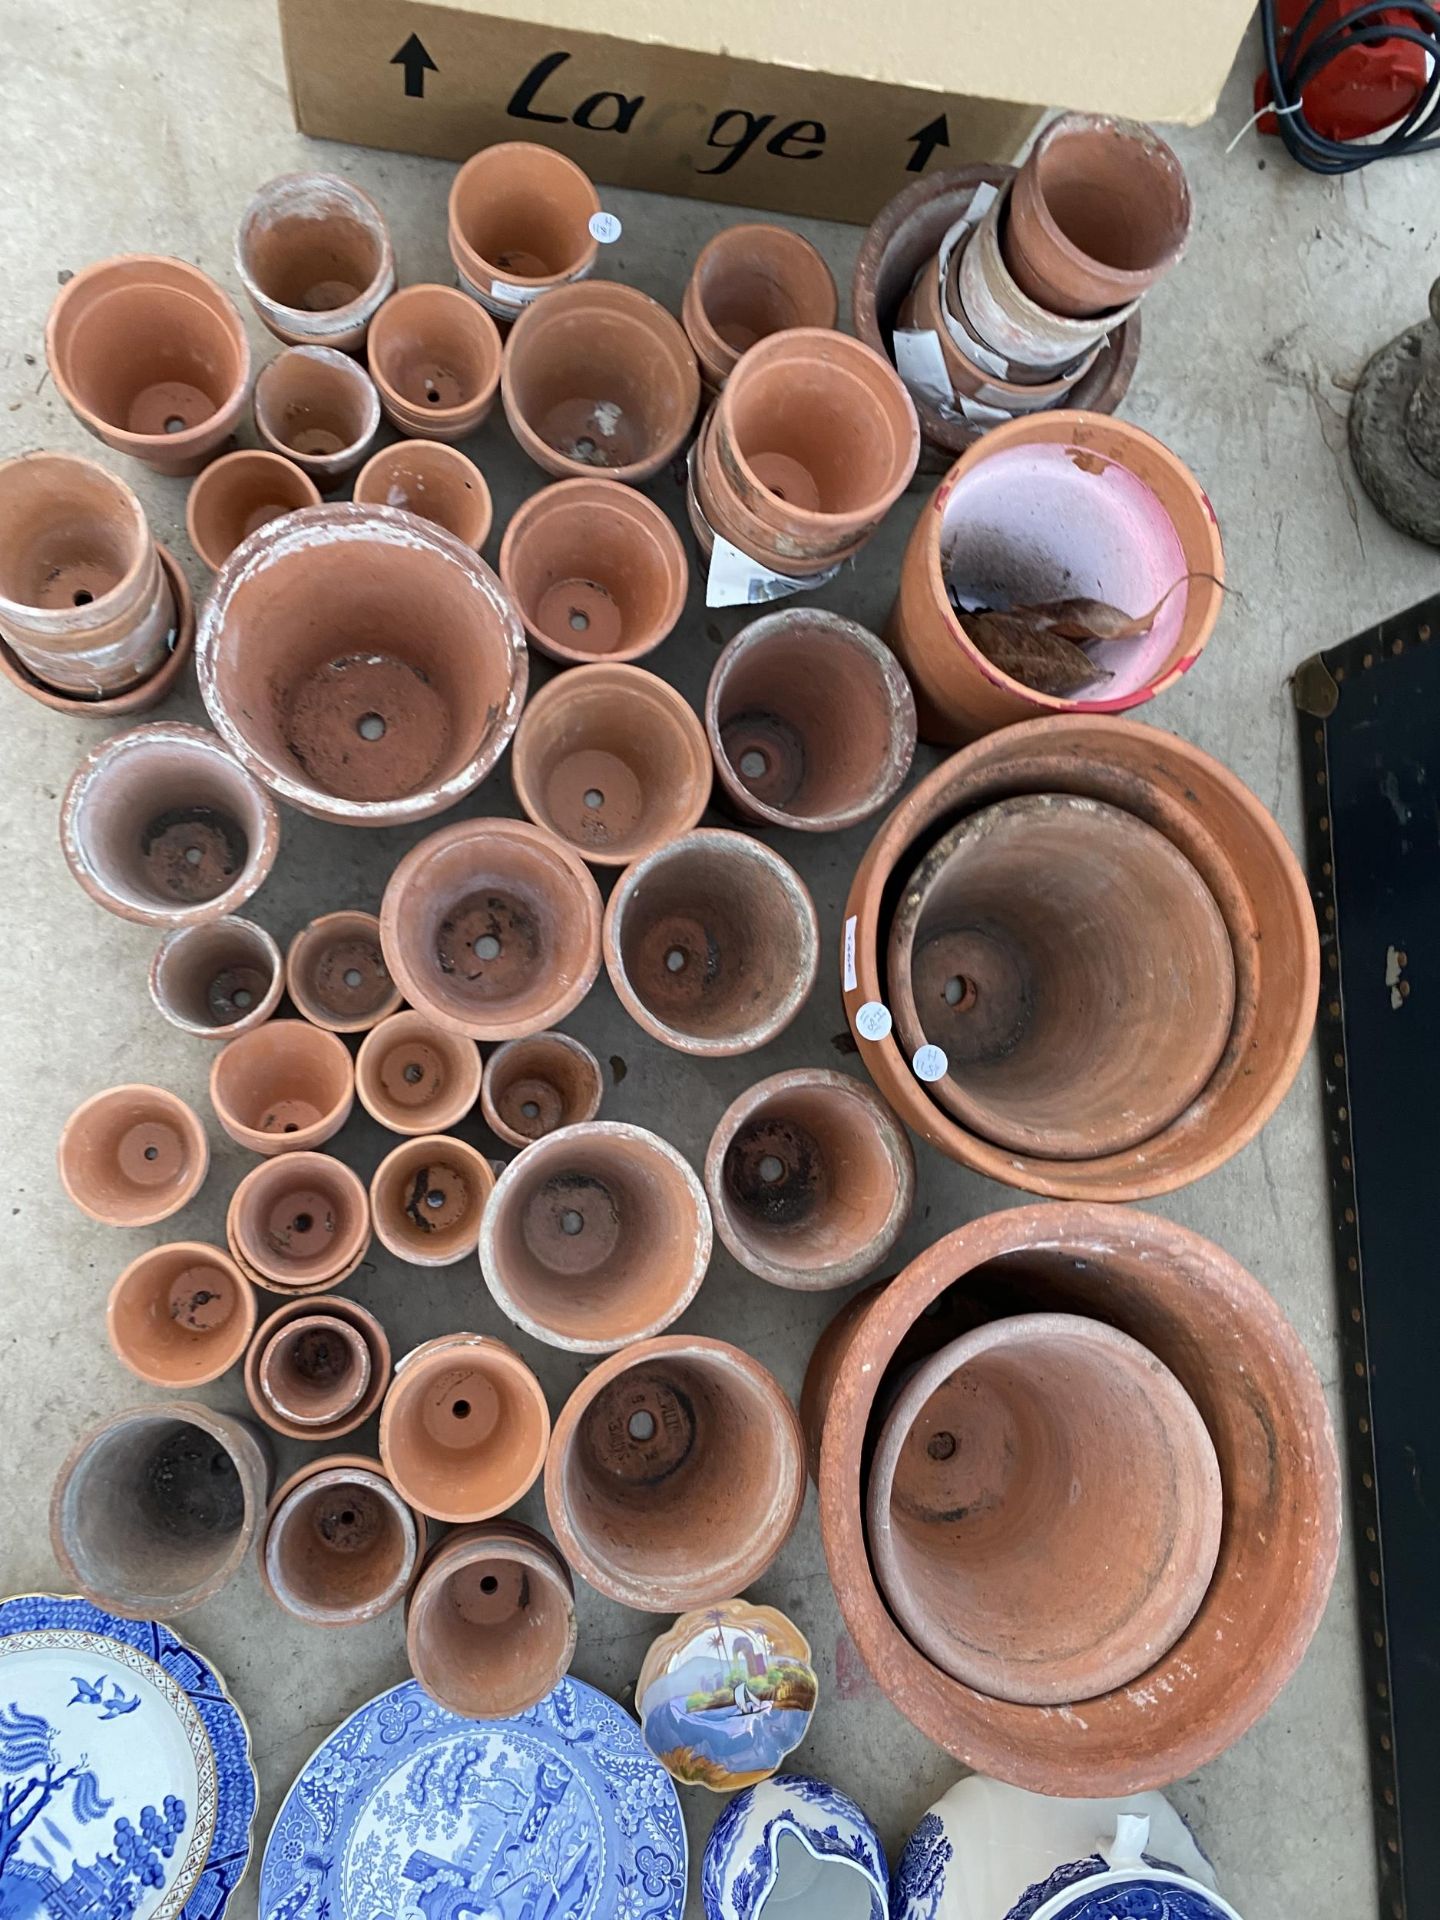 A LARGE ASSORTMENT OF TERRACOTTA PLANT POTS OF VARIOUS SIZES - Image 5 of 5